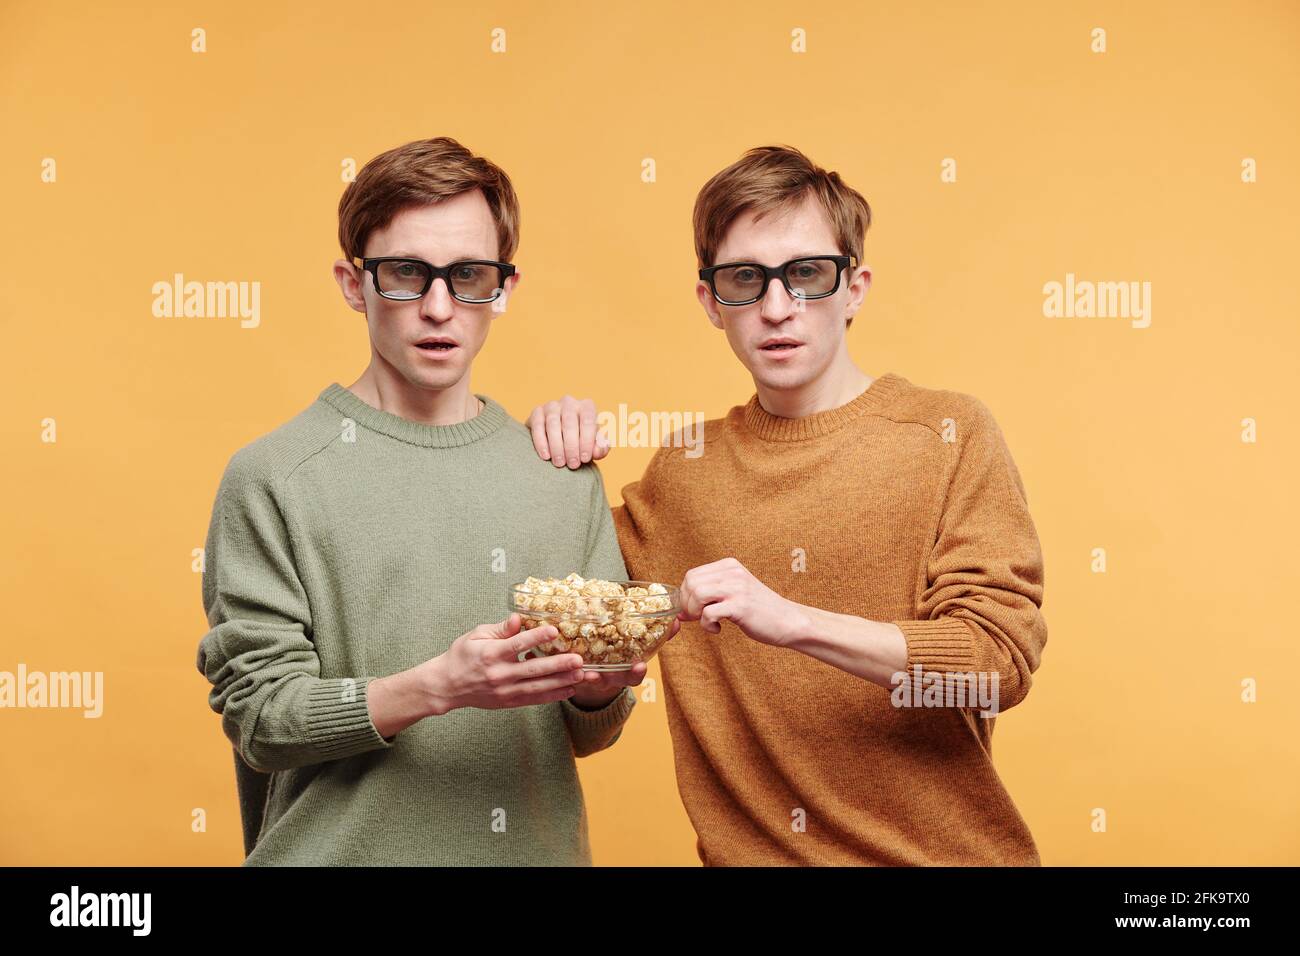 Portrait of shocked curious twins in sweaters and 3D goggles eating popcorn while watching movie against orange background Stock Photo